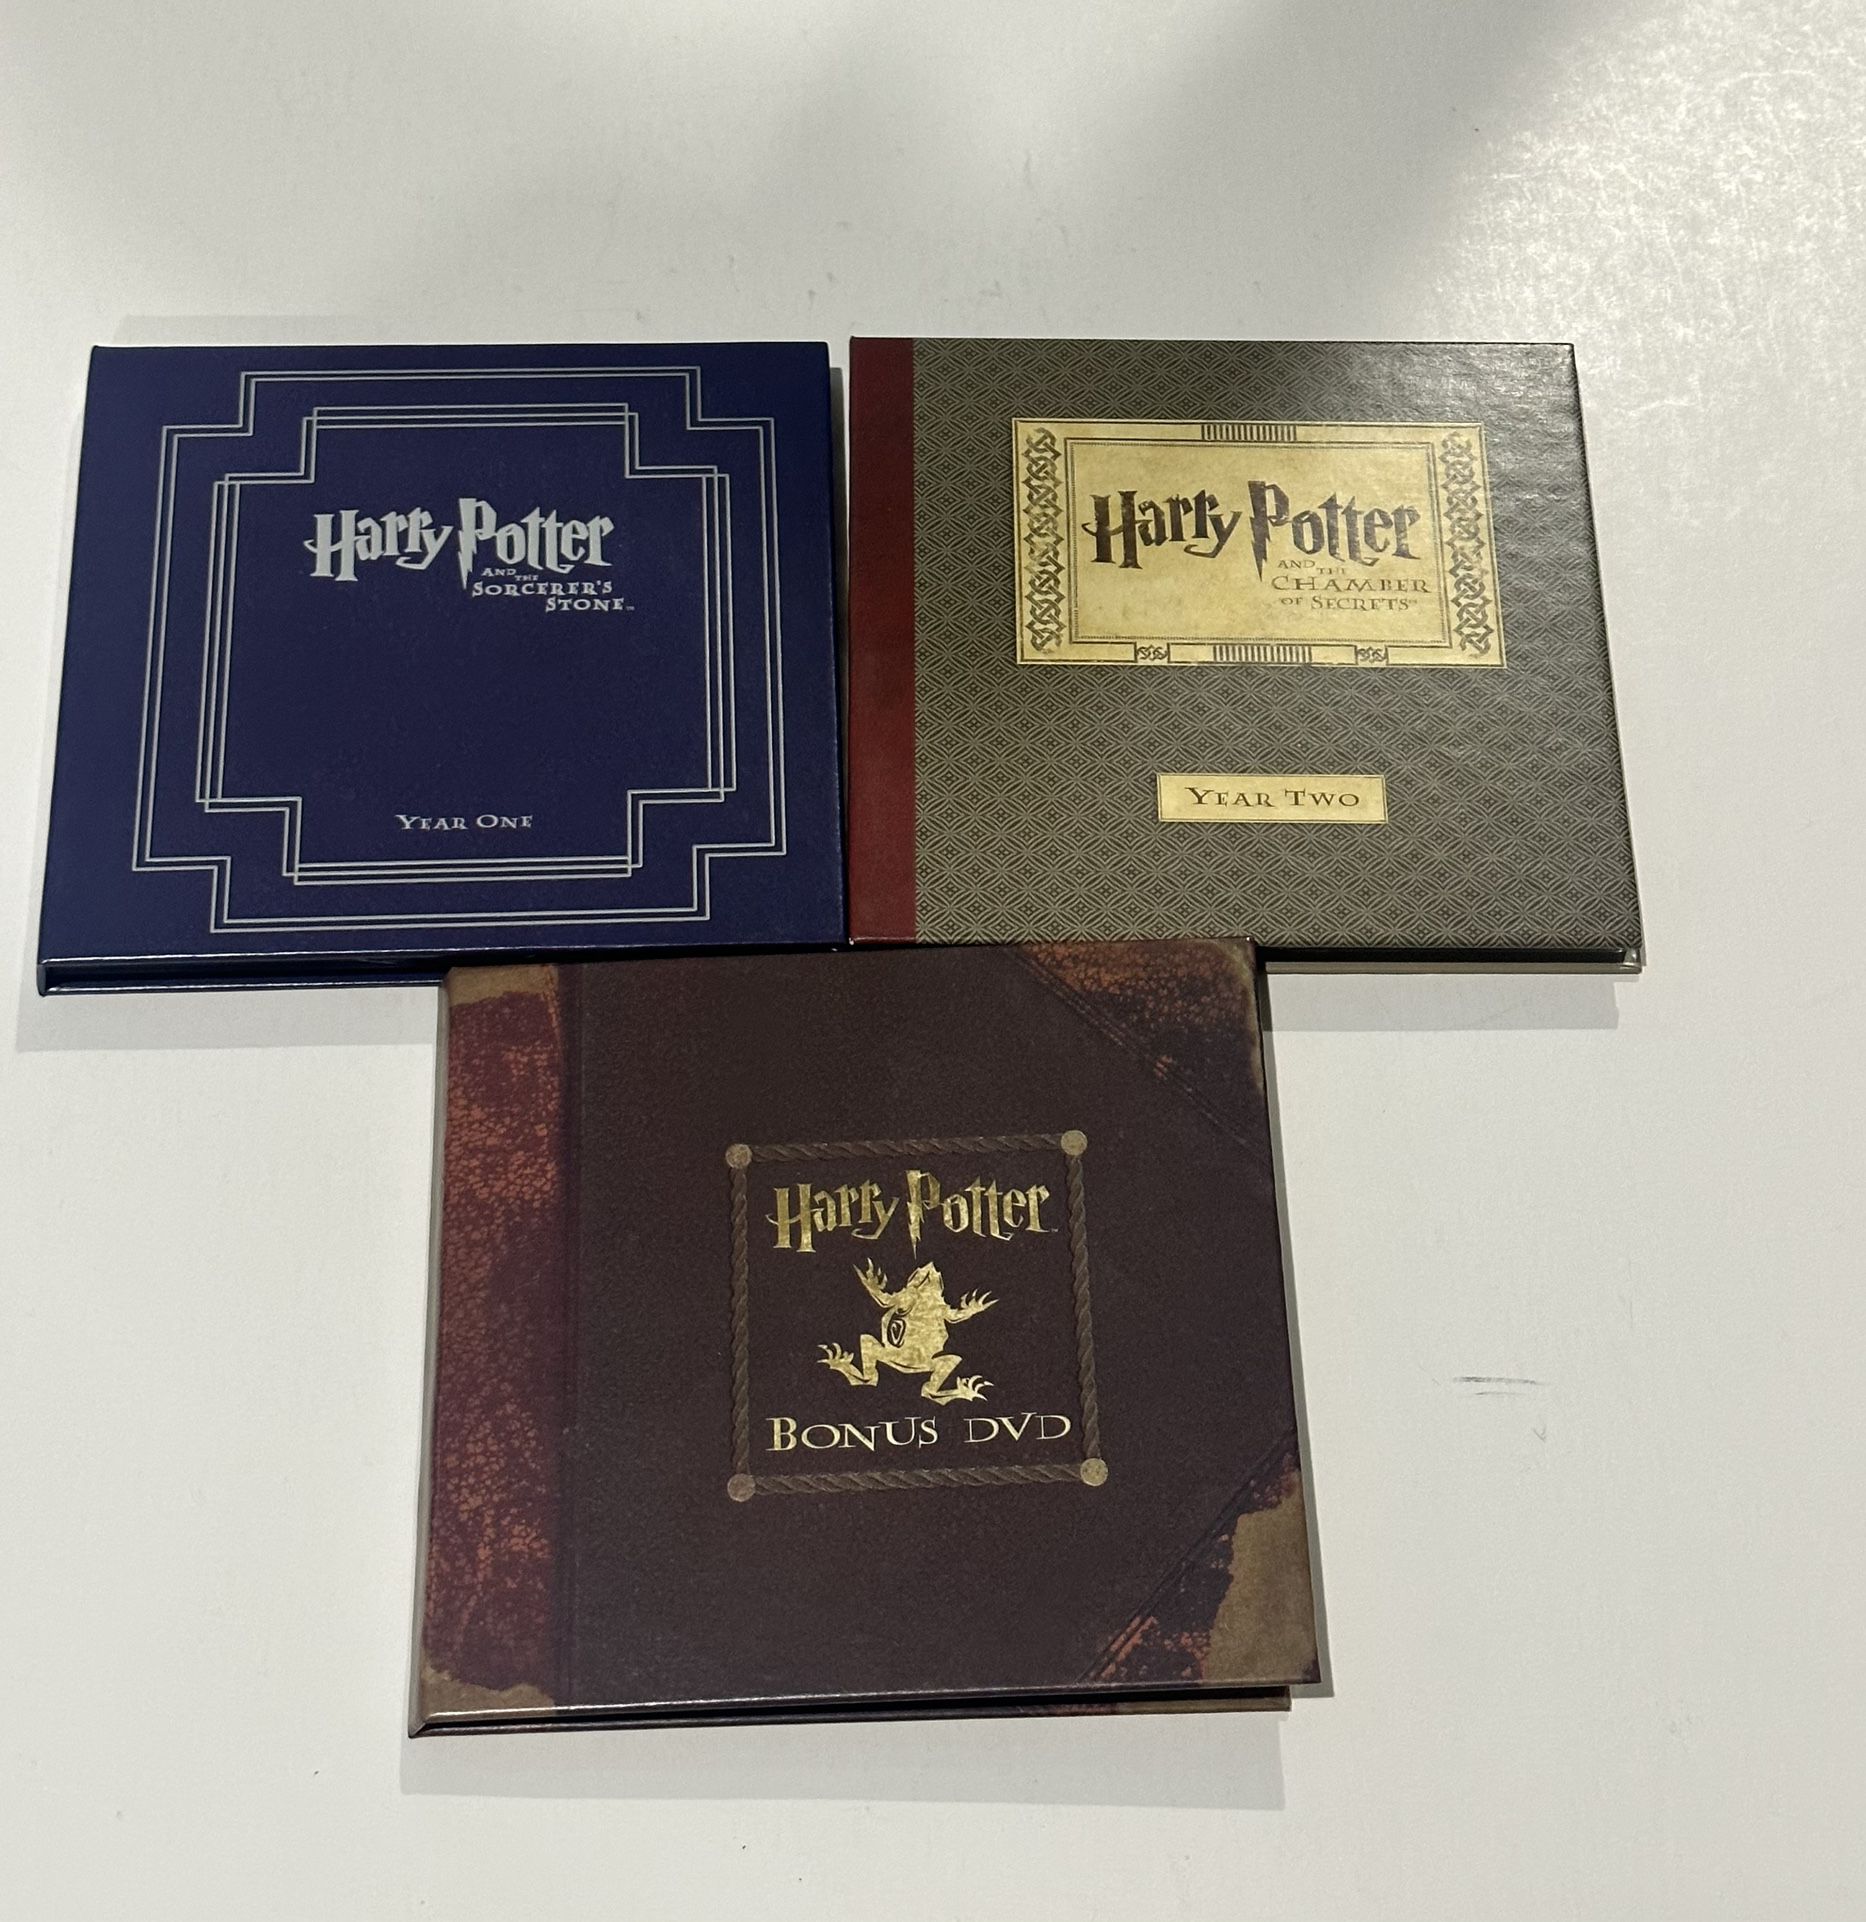 Harry Potter Limited Edition DVD Gift Set